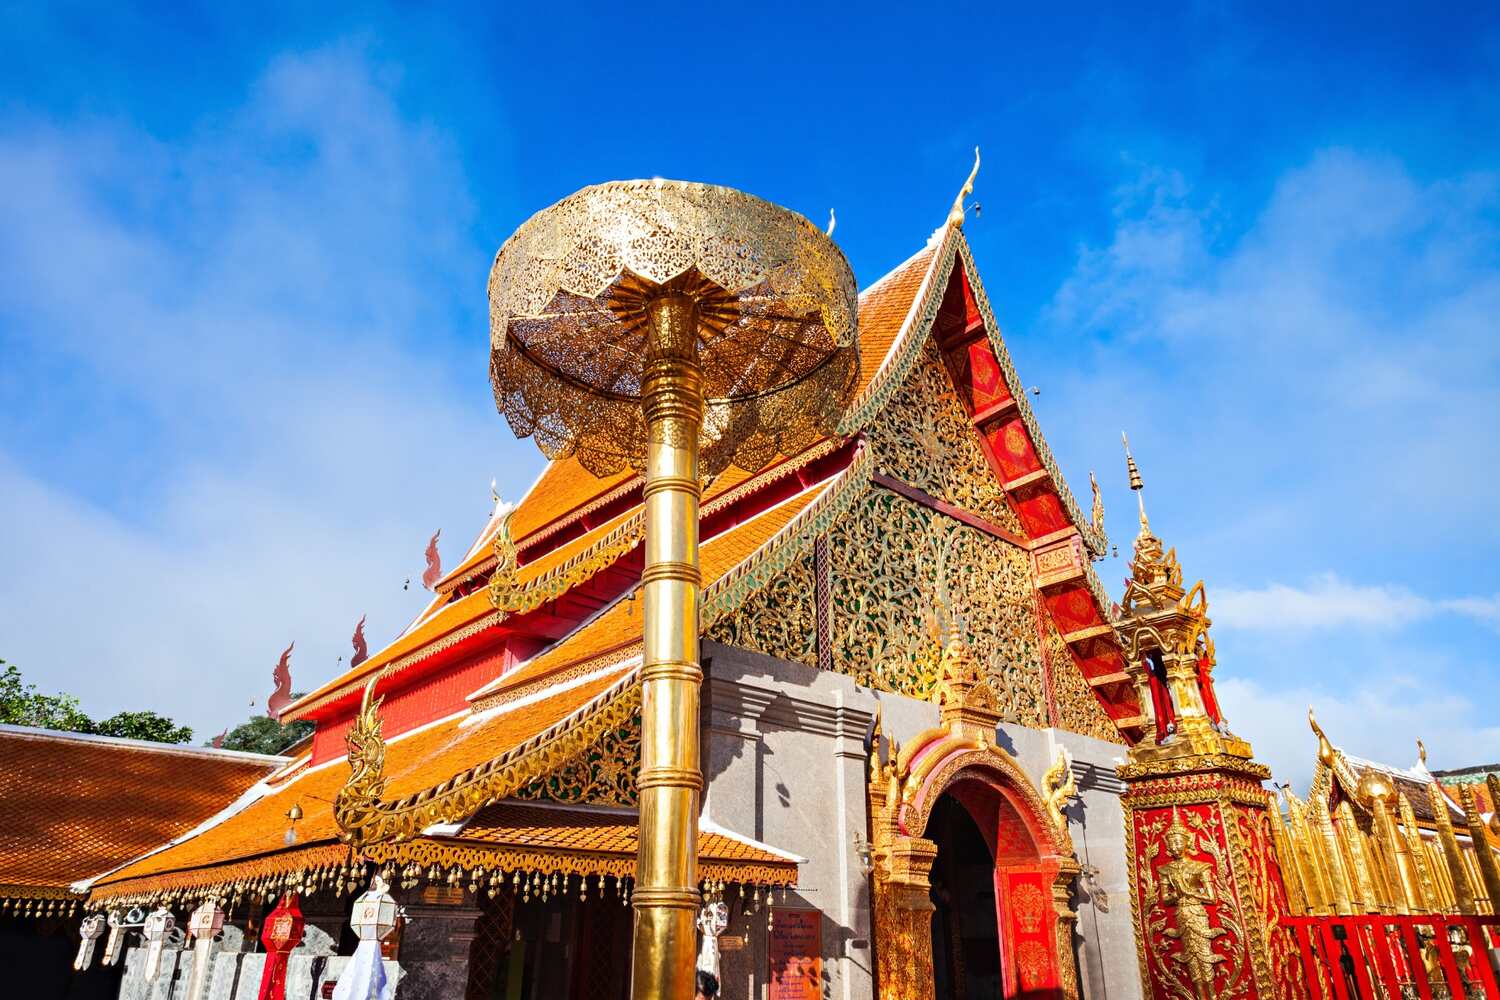 A golden spire of a temple with intricate red and blue decorations against a blue sky with fluffy clouds